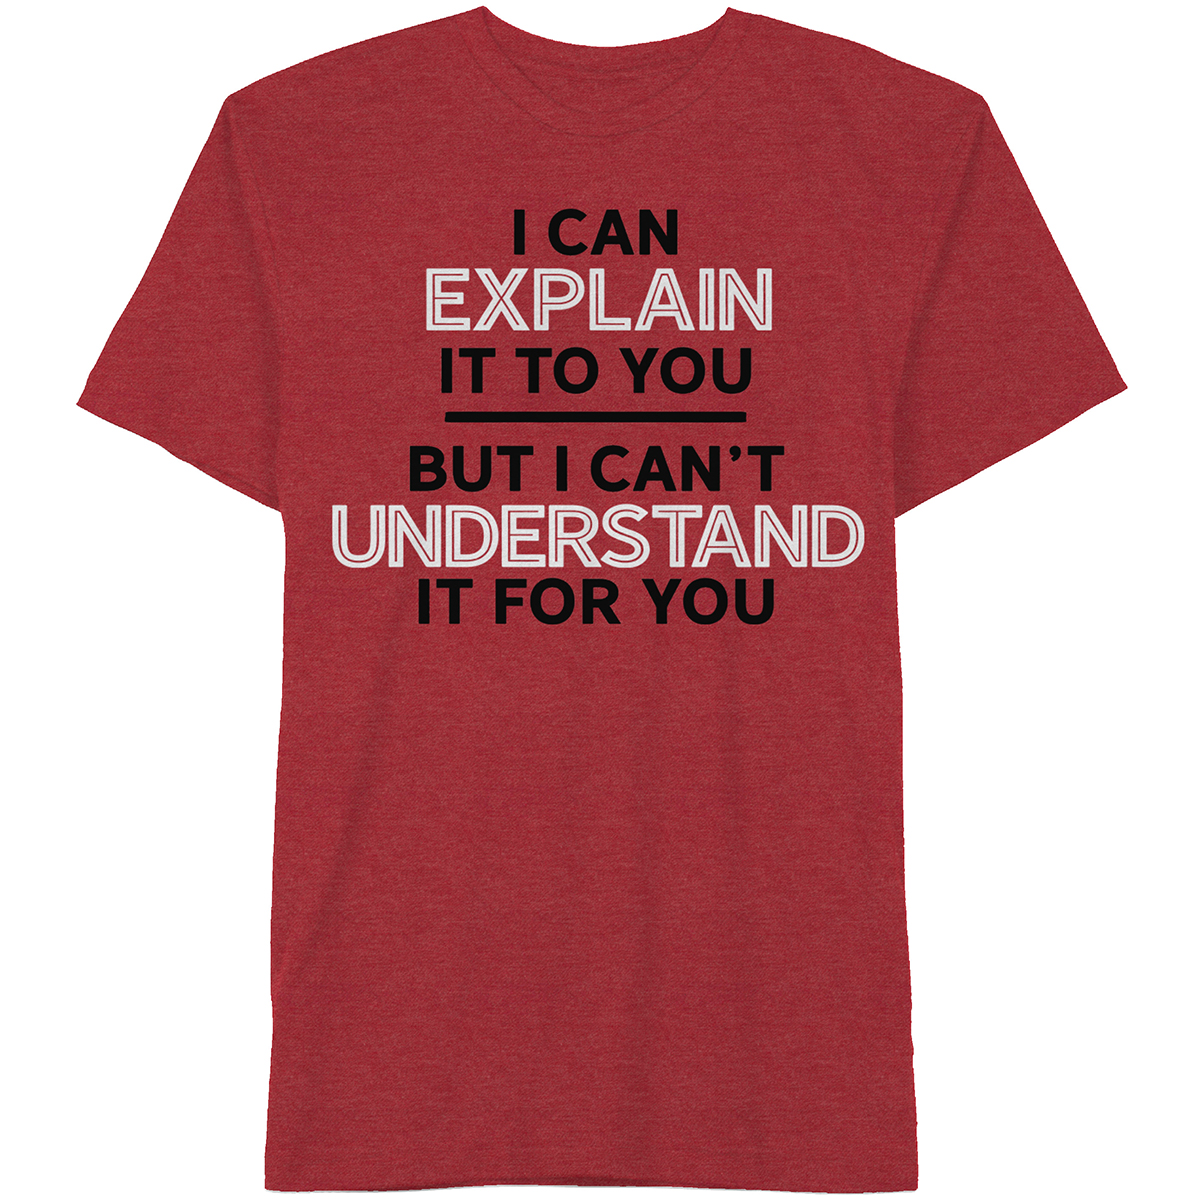 Hybrid Young Men's I Can Explain Short-Sleeve Graphic Tee